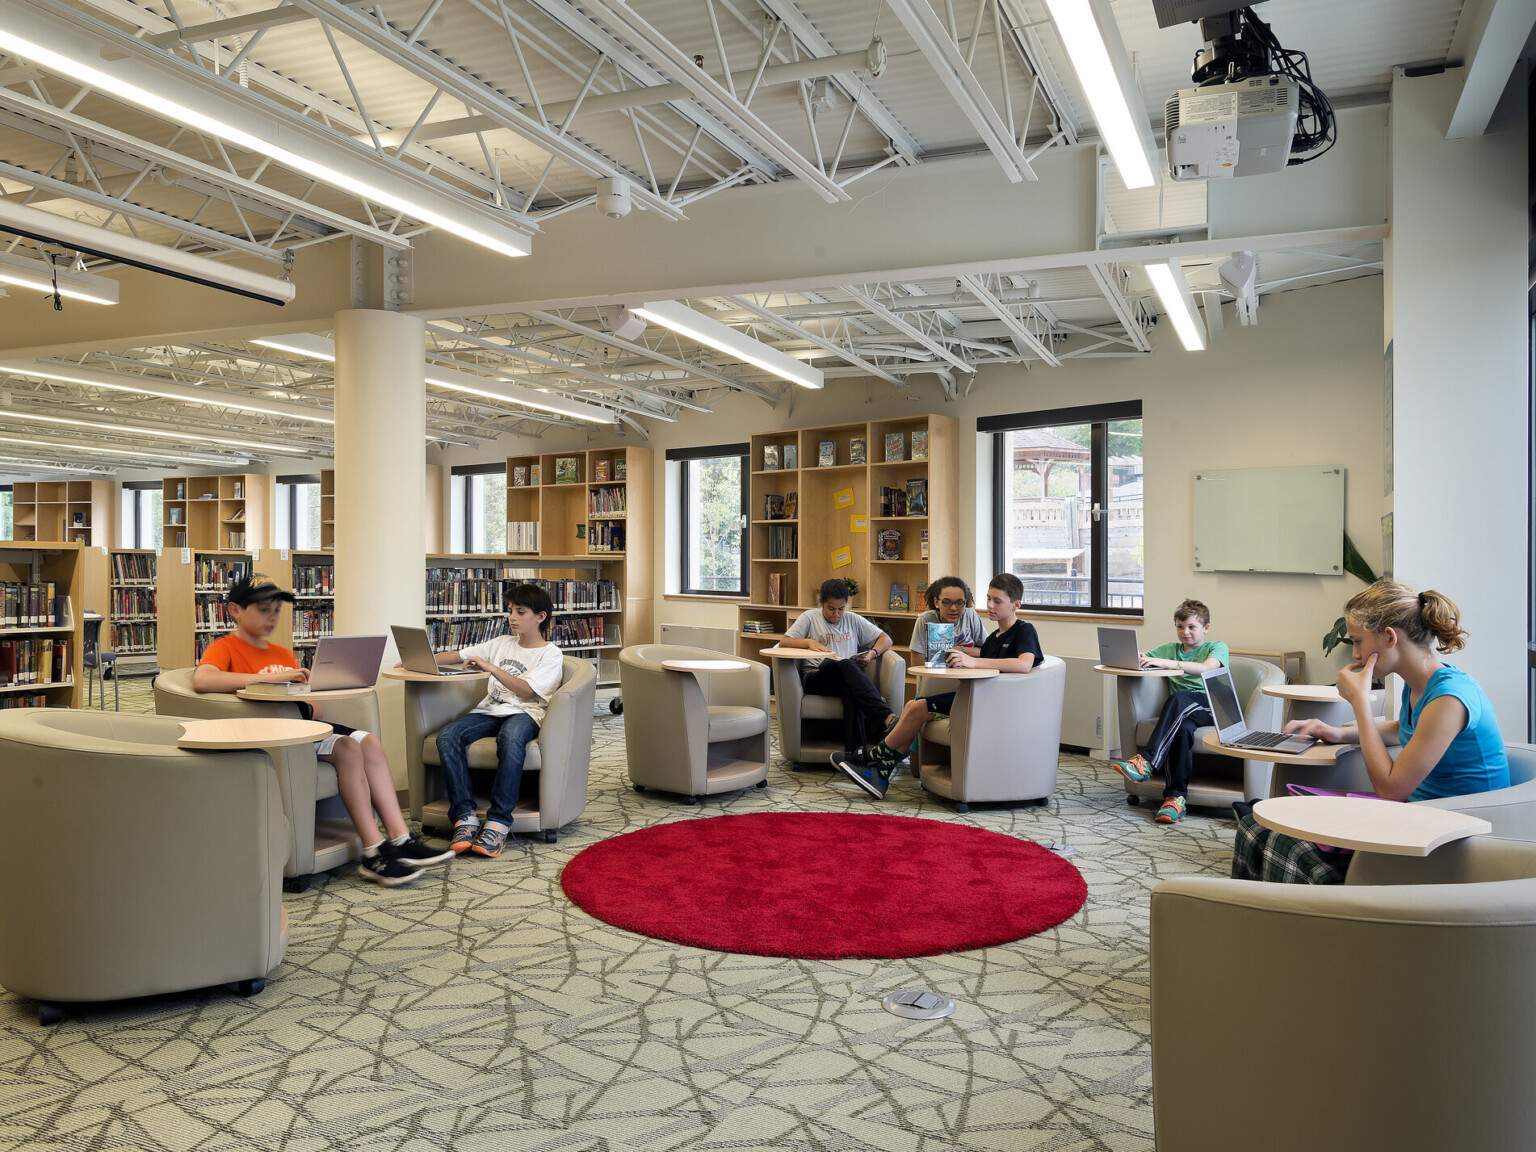 students in library on laptops among double-height ceilings, a bright, red round rug brings the groups together, natural daylight and skylights